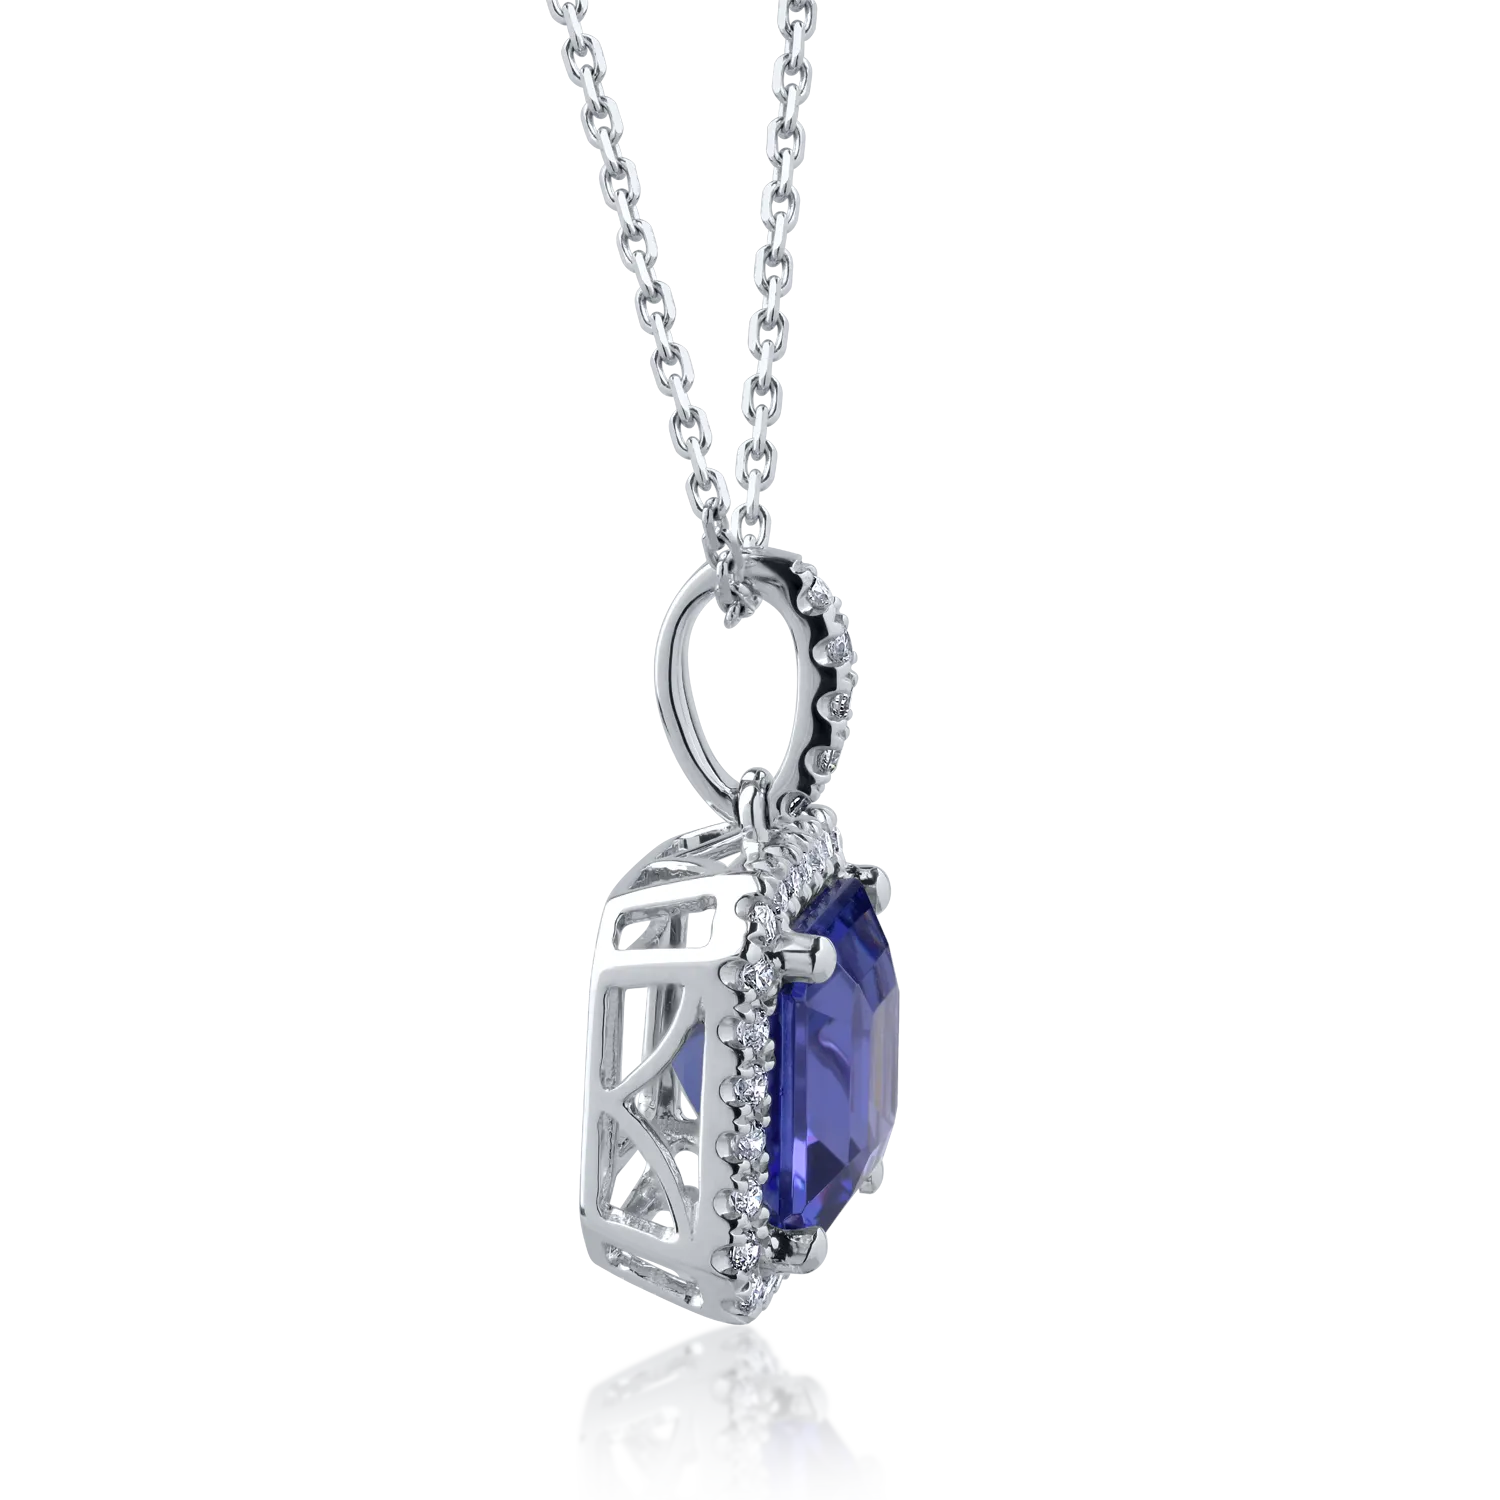 18K white gold pendant necklace with 2.96ct tanzanite and 0.26ct diamonds